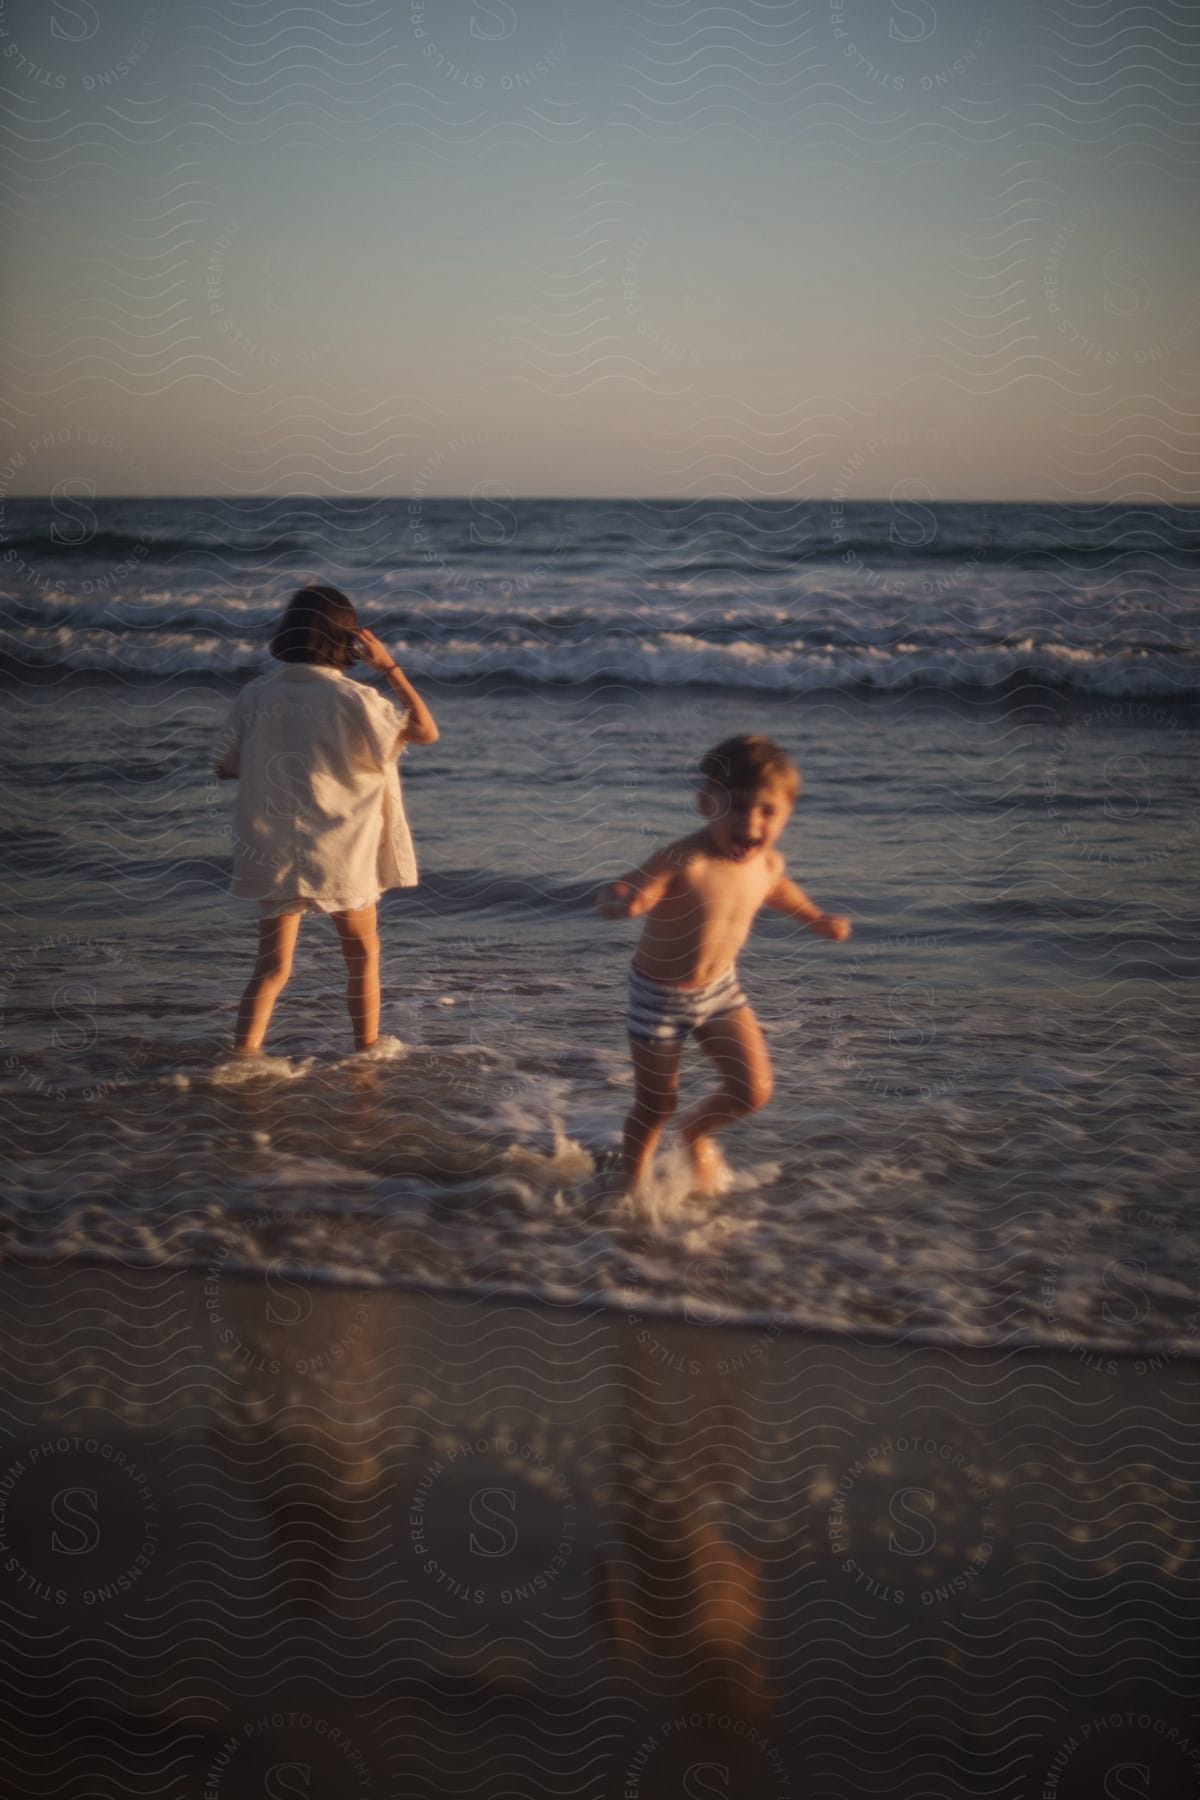 A girl and a male toddler are wading in ocean water on the beach on a clear day.